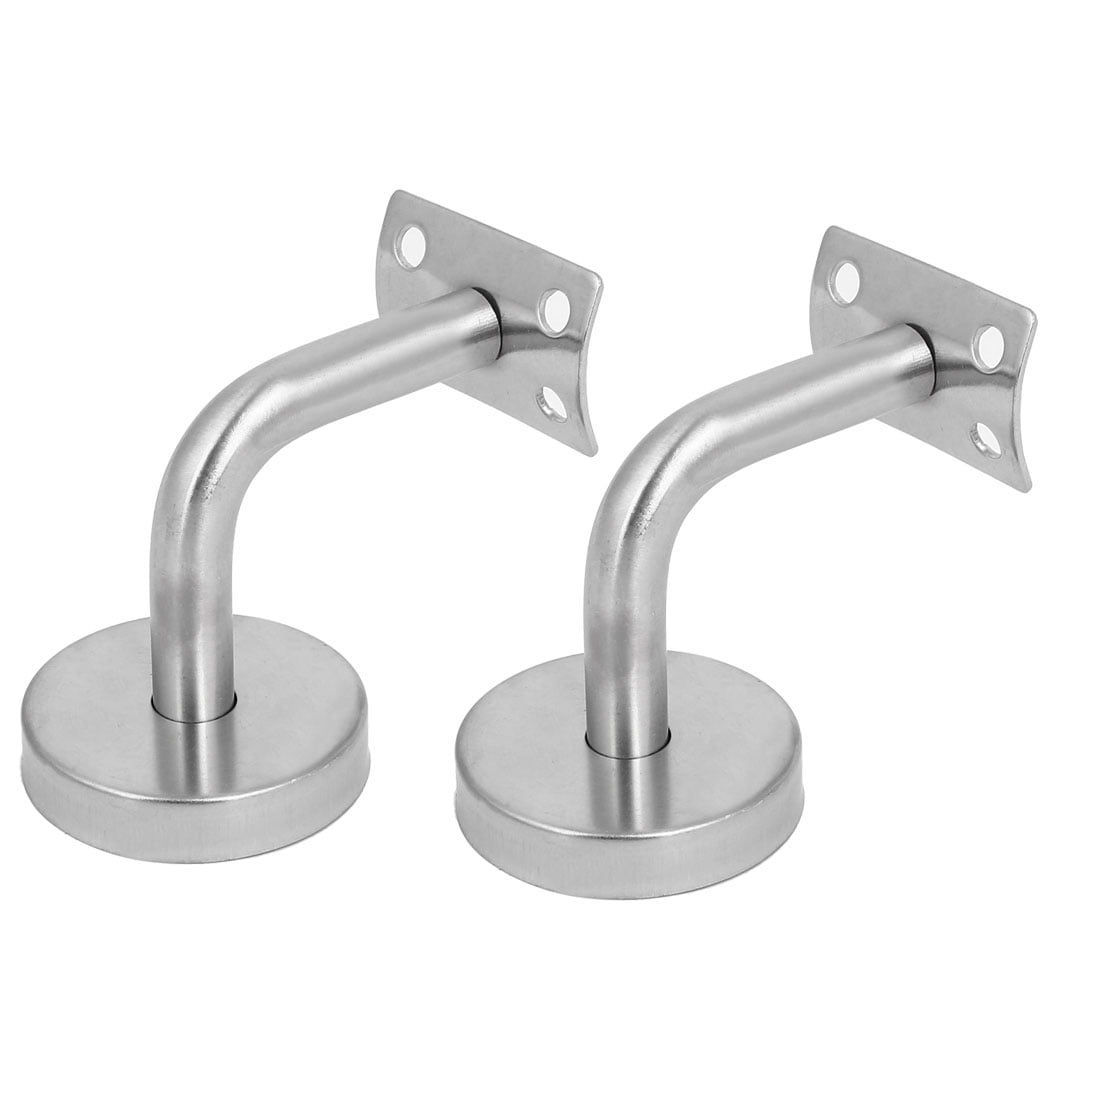 60mmx60mmx12mm 304 Stainless Steel Wall Mount Stair Handrail Bracket Stainless Steel Handrail Wall Brackets